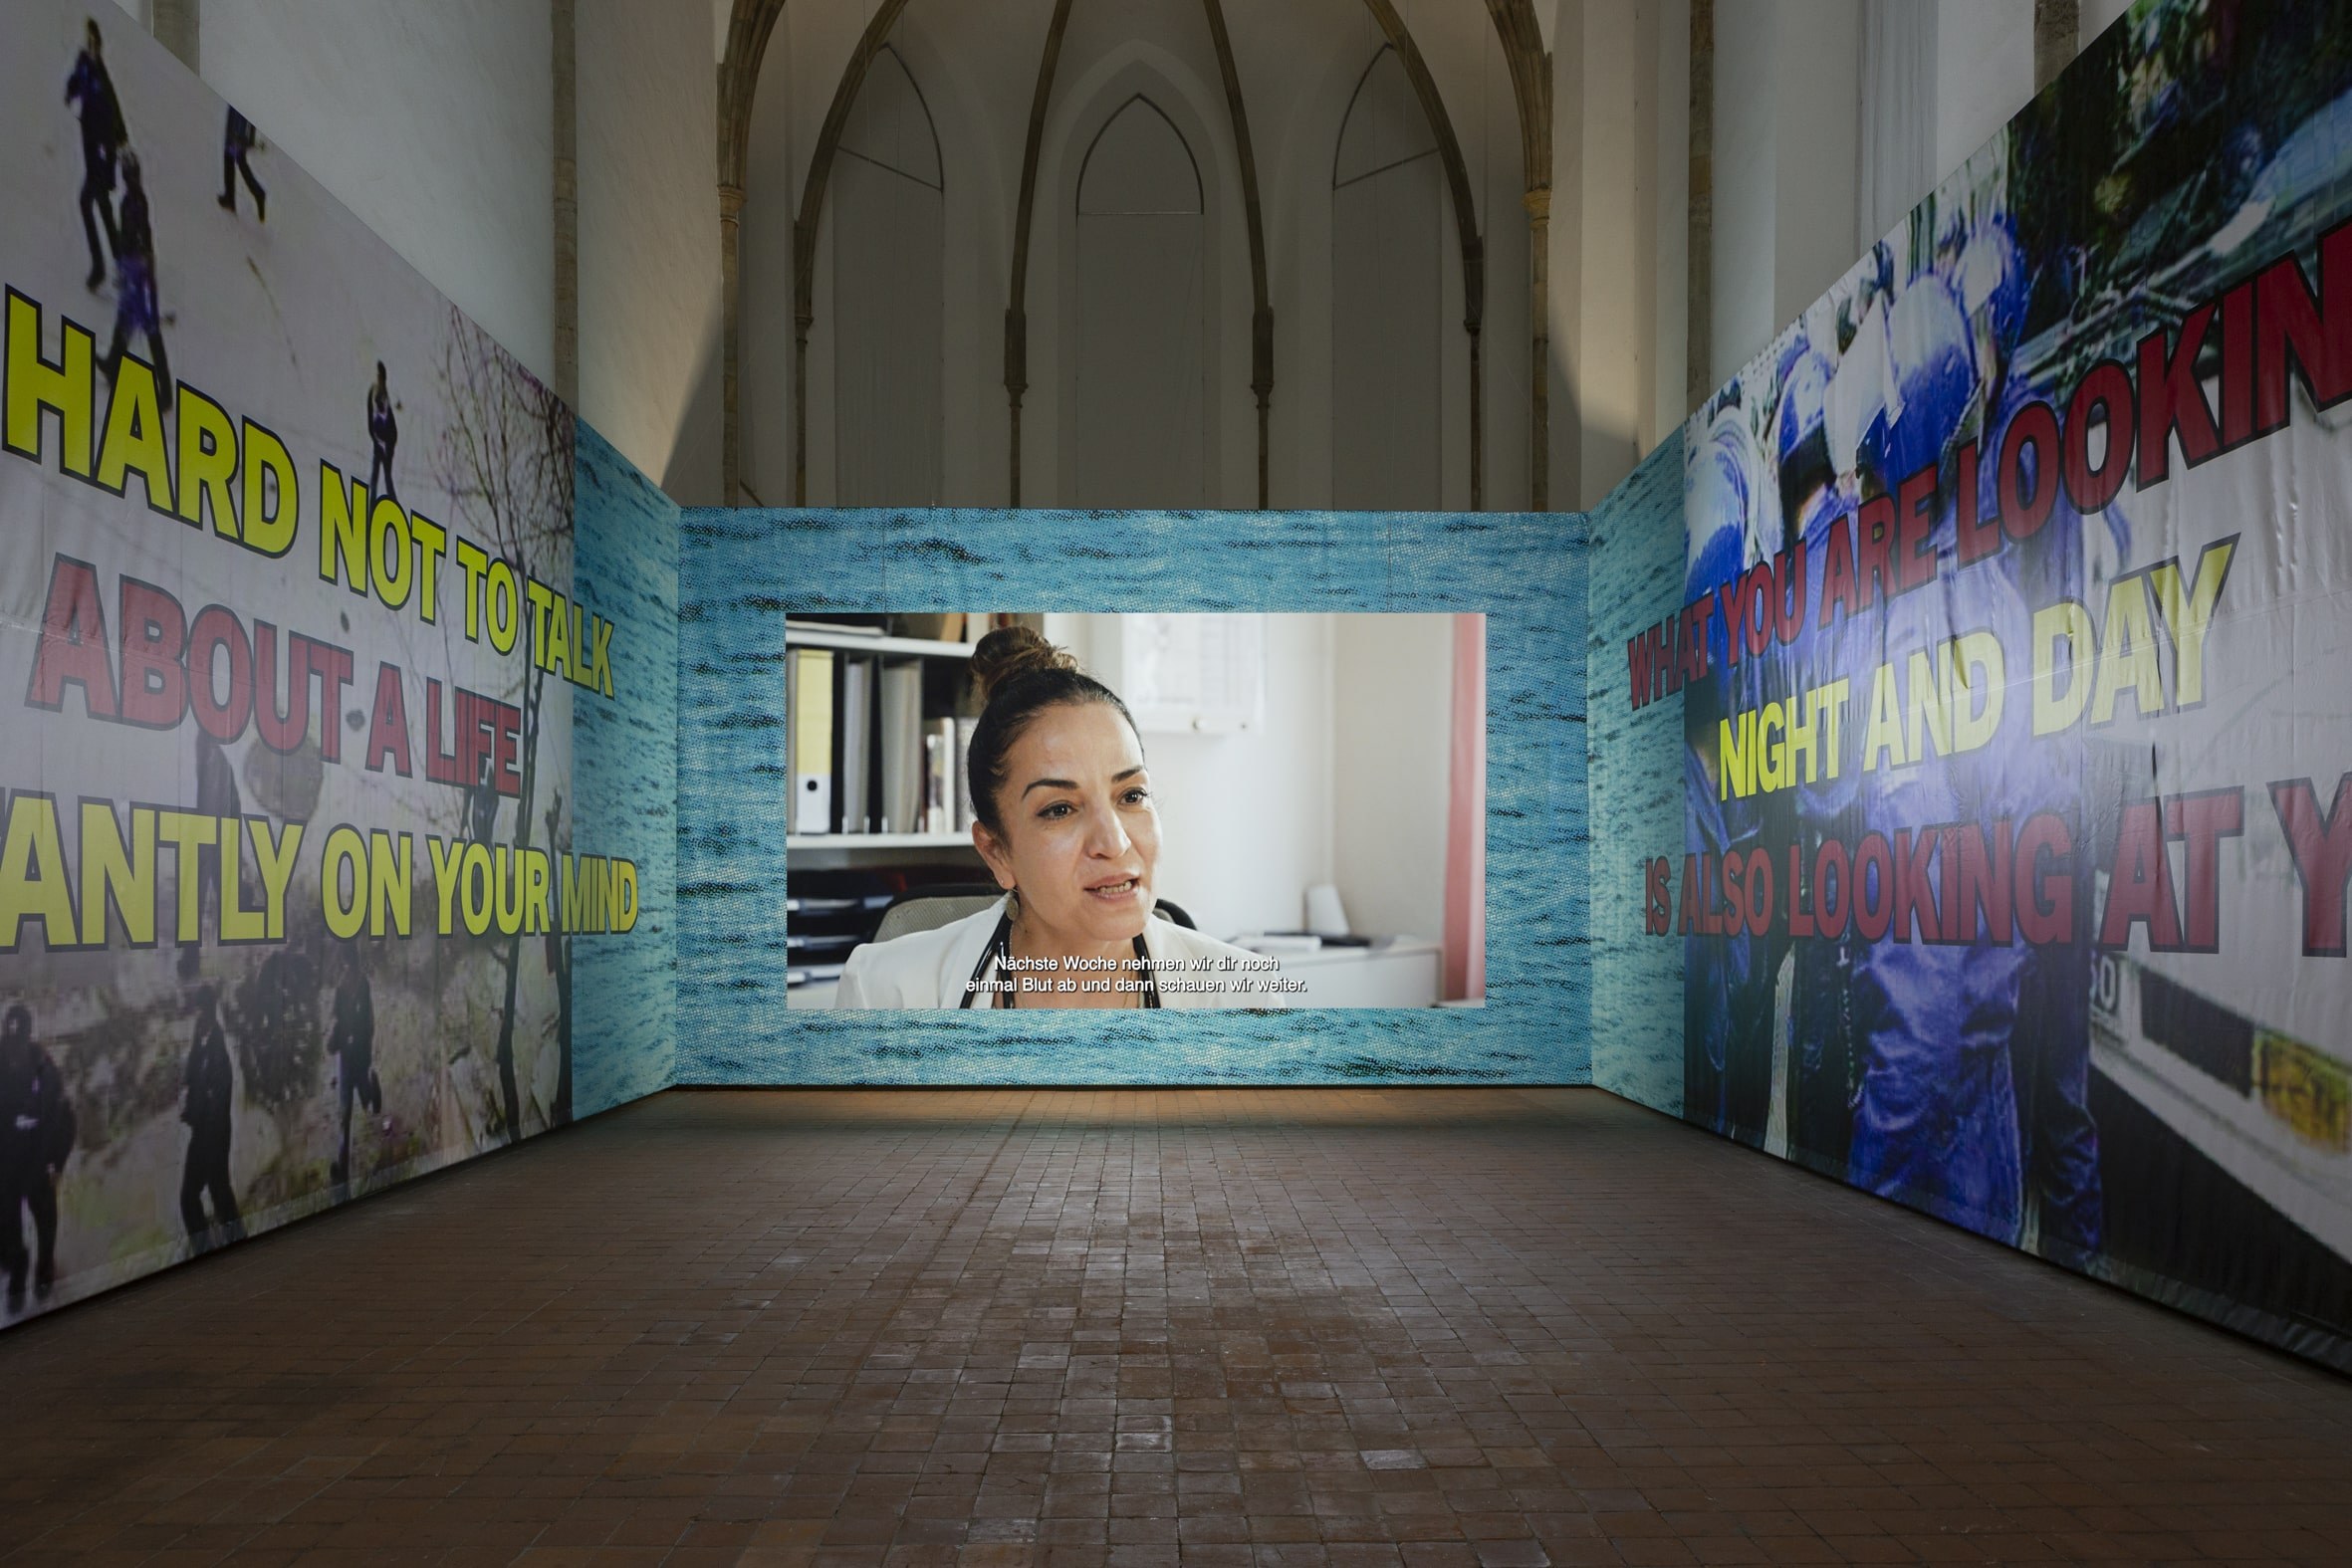 Cemile Sahin, A Song of Euphrates & Tigris, installation view Kunsthalle OsnabrÃ¼ck, 2022. Photo: Lucie Marsmann